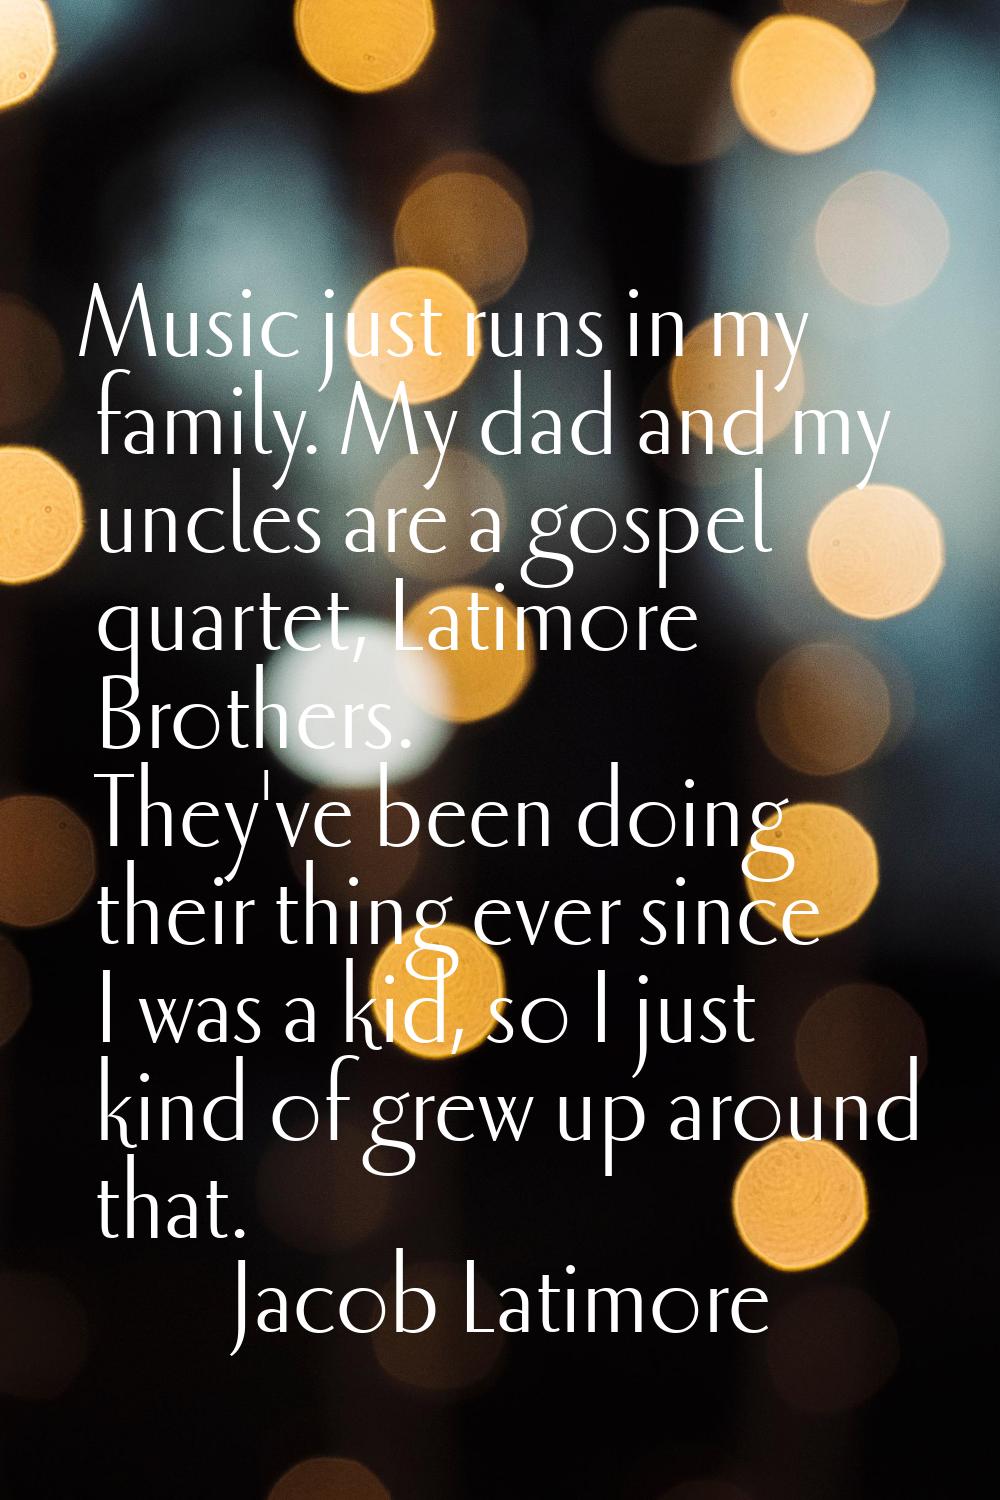 Music just runs in my family. My dad and my uncles are a gospel quartet, Latimore Brothers. They've